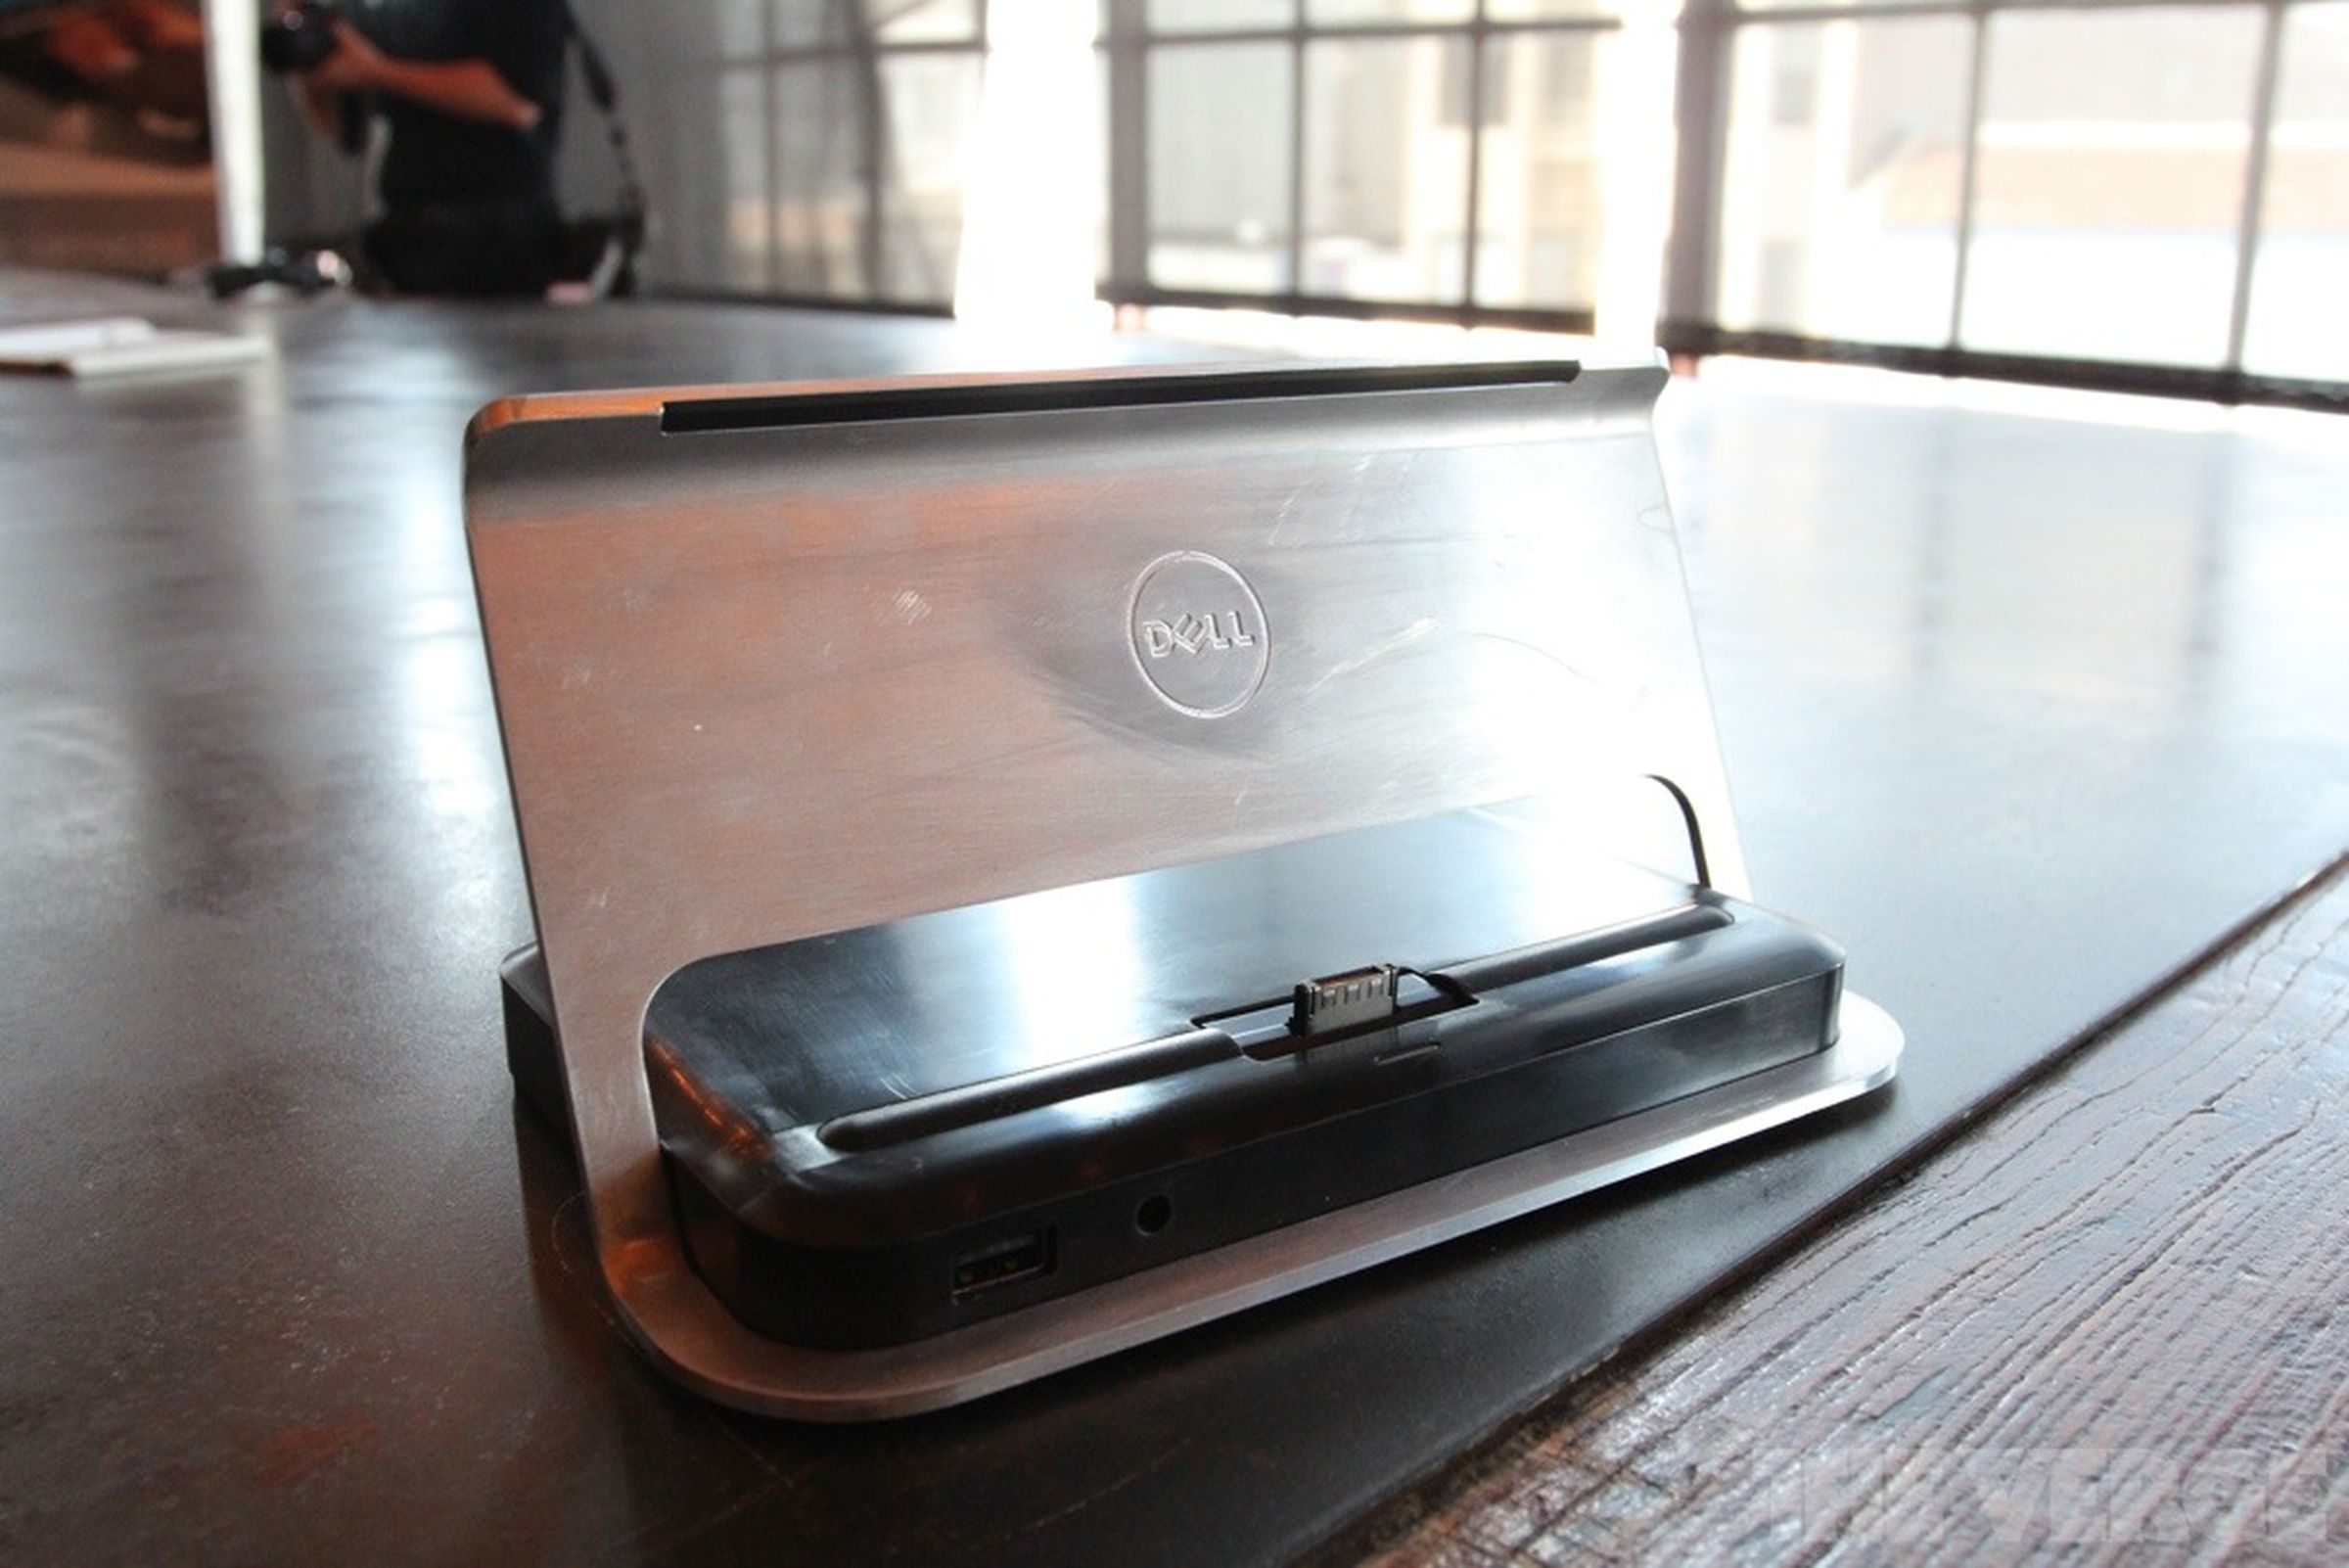 Dell Latitude 10 tablet hands-on photos